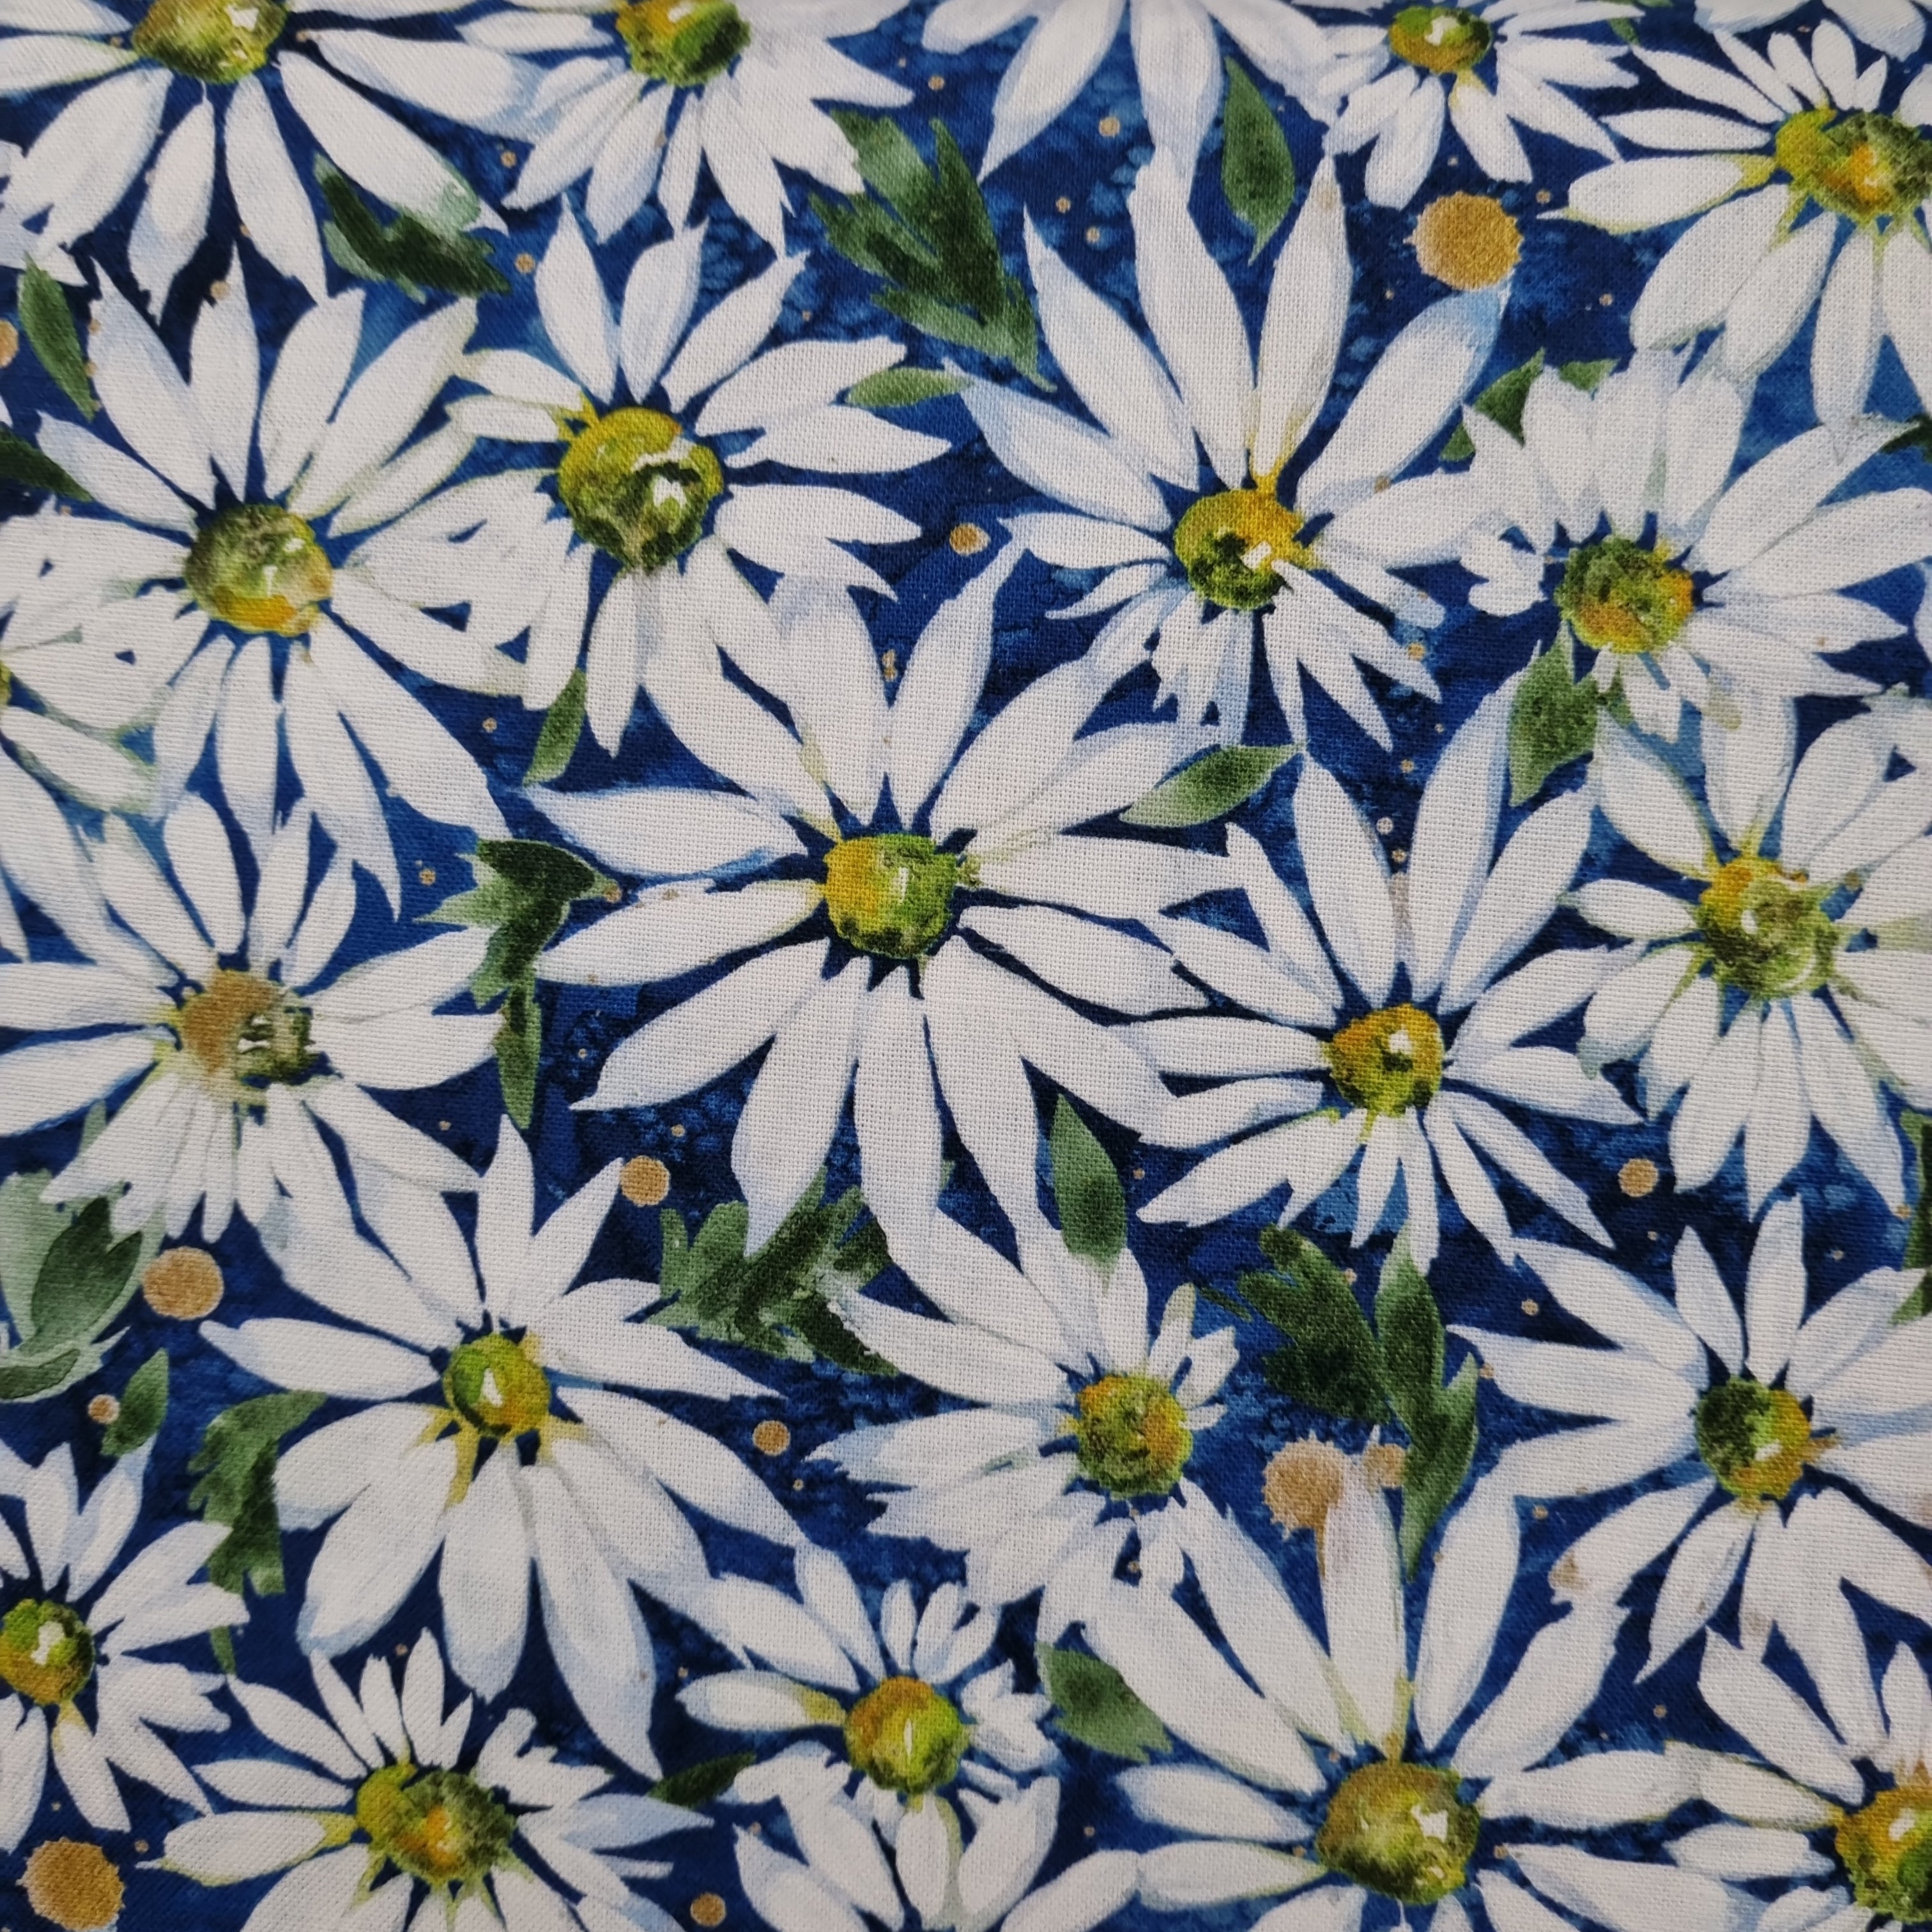 Oopsie daisy Cobalt Dont you think daisies